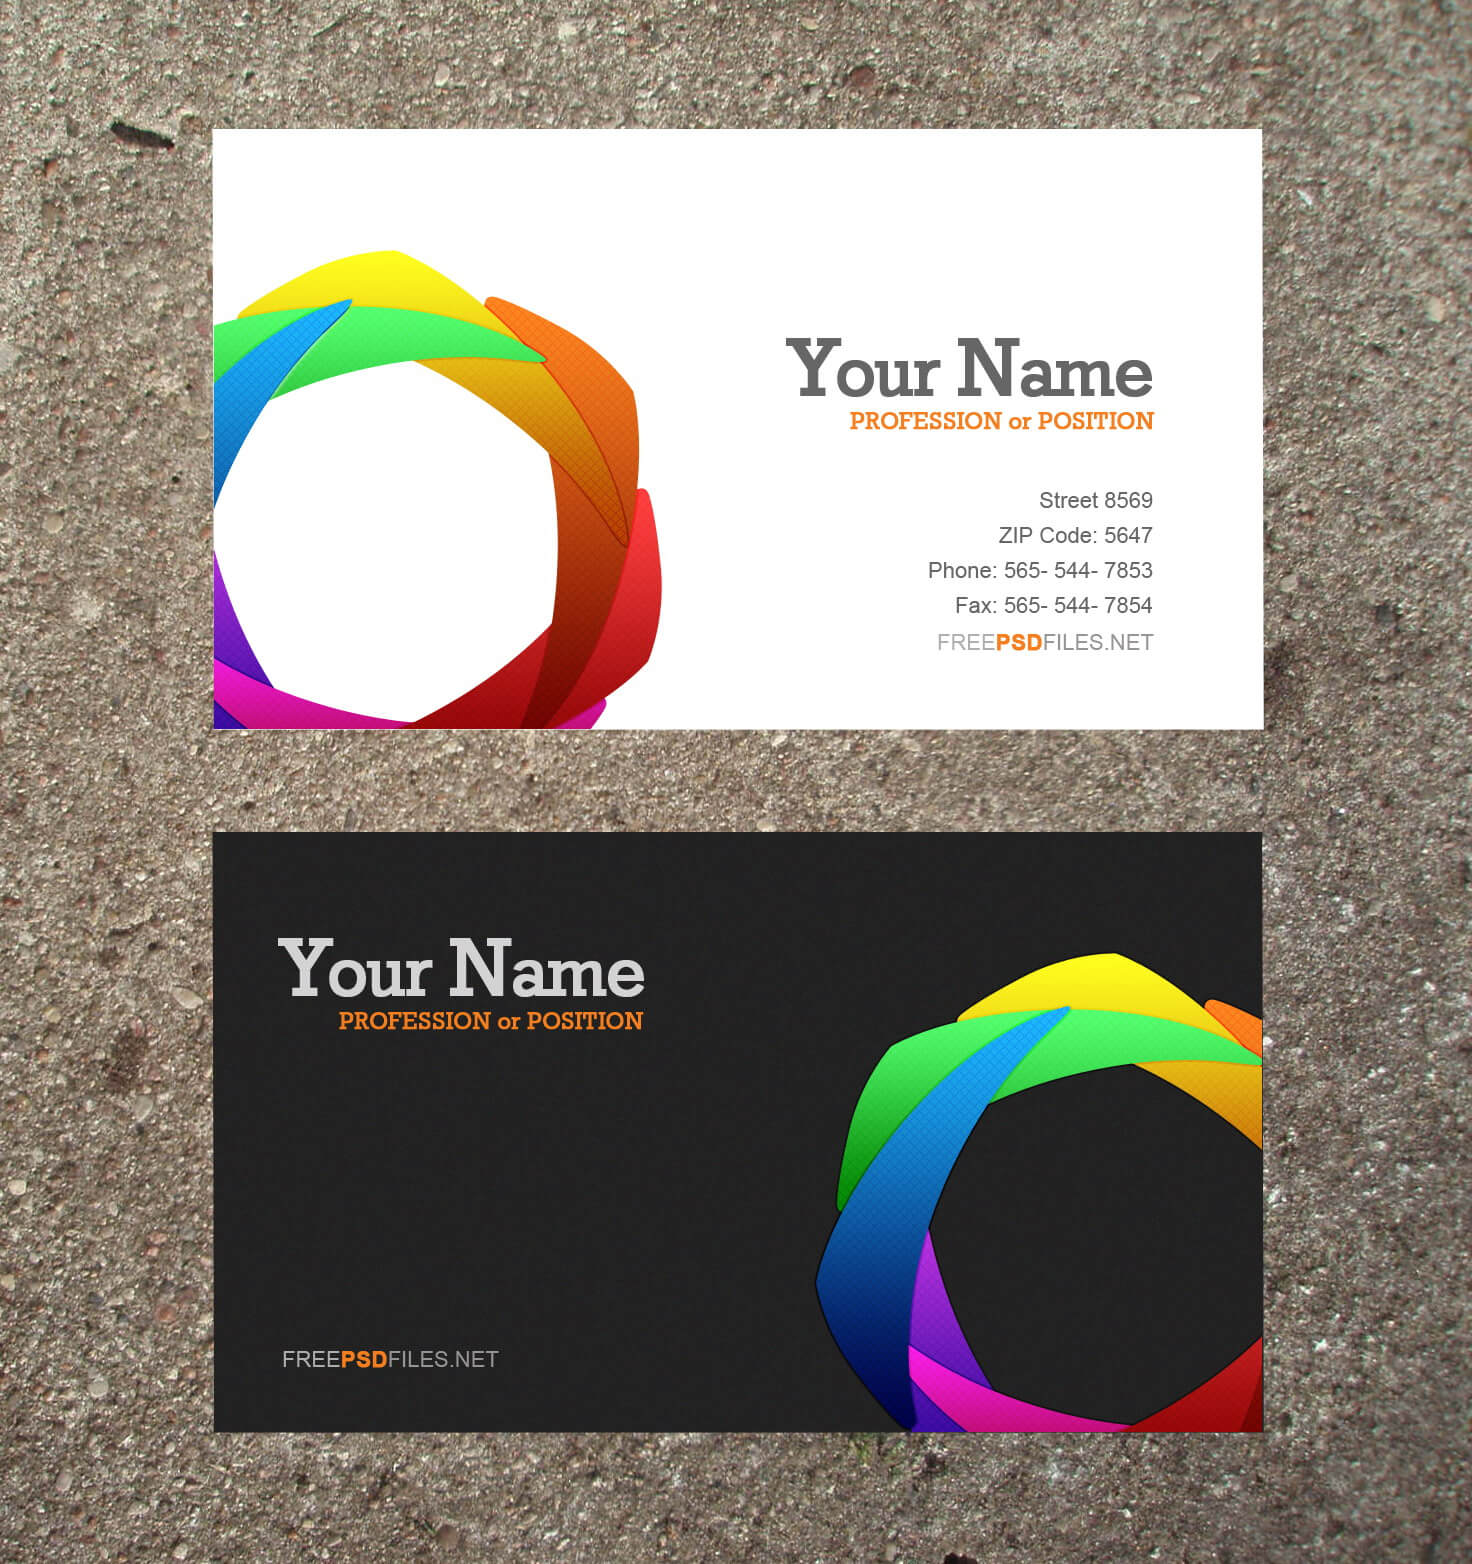 Business Card Free Templates Download | Business Card Sample Throughout Blank Business Card Template Download